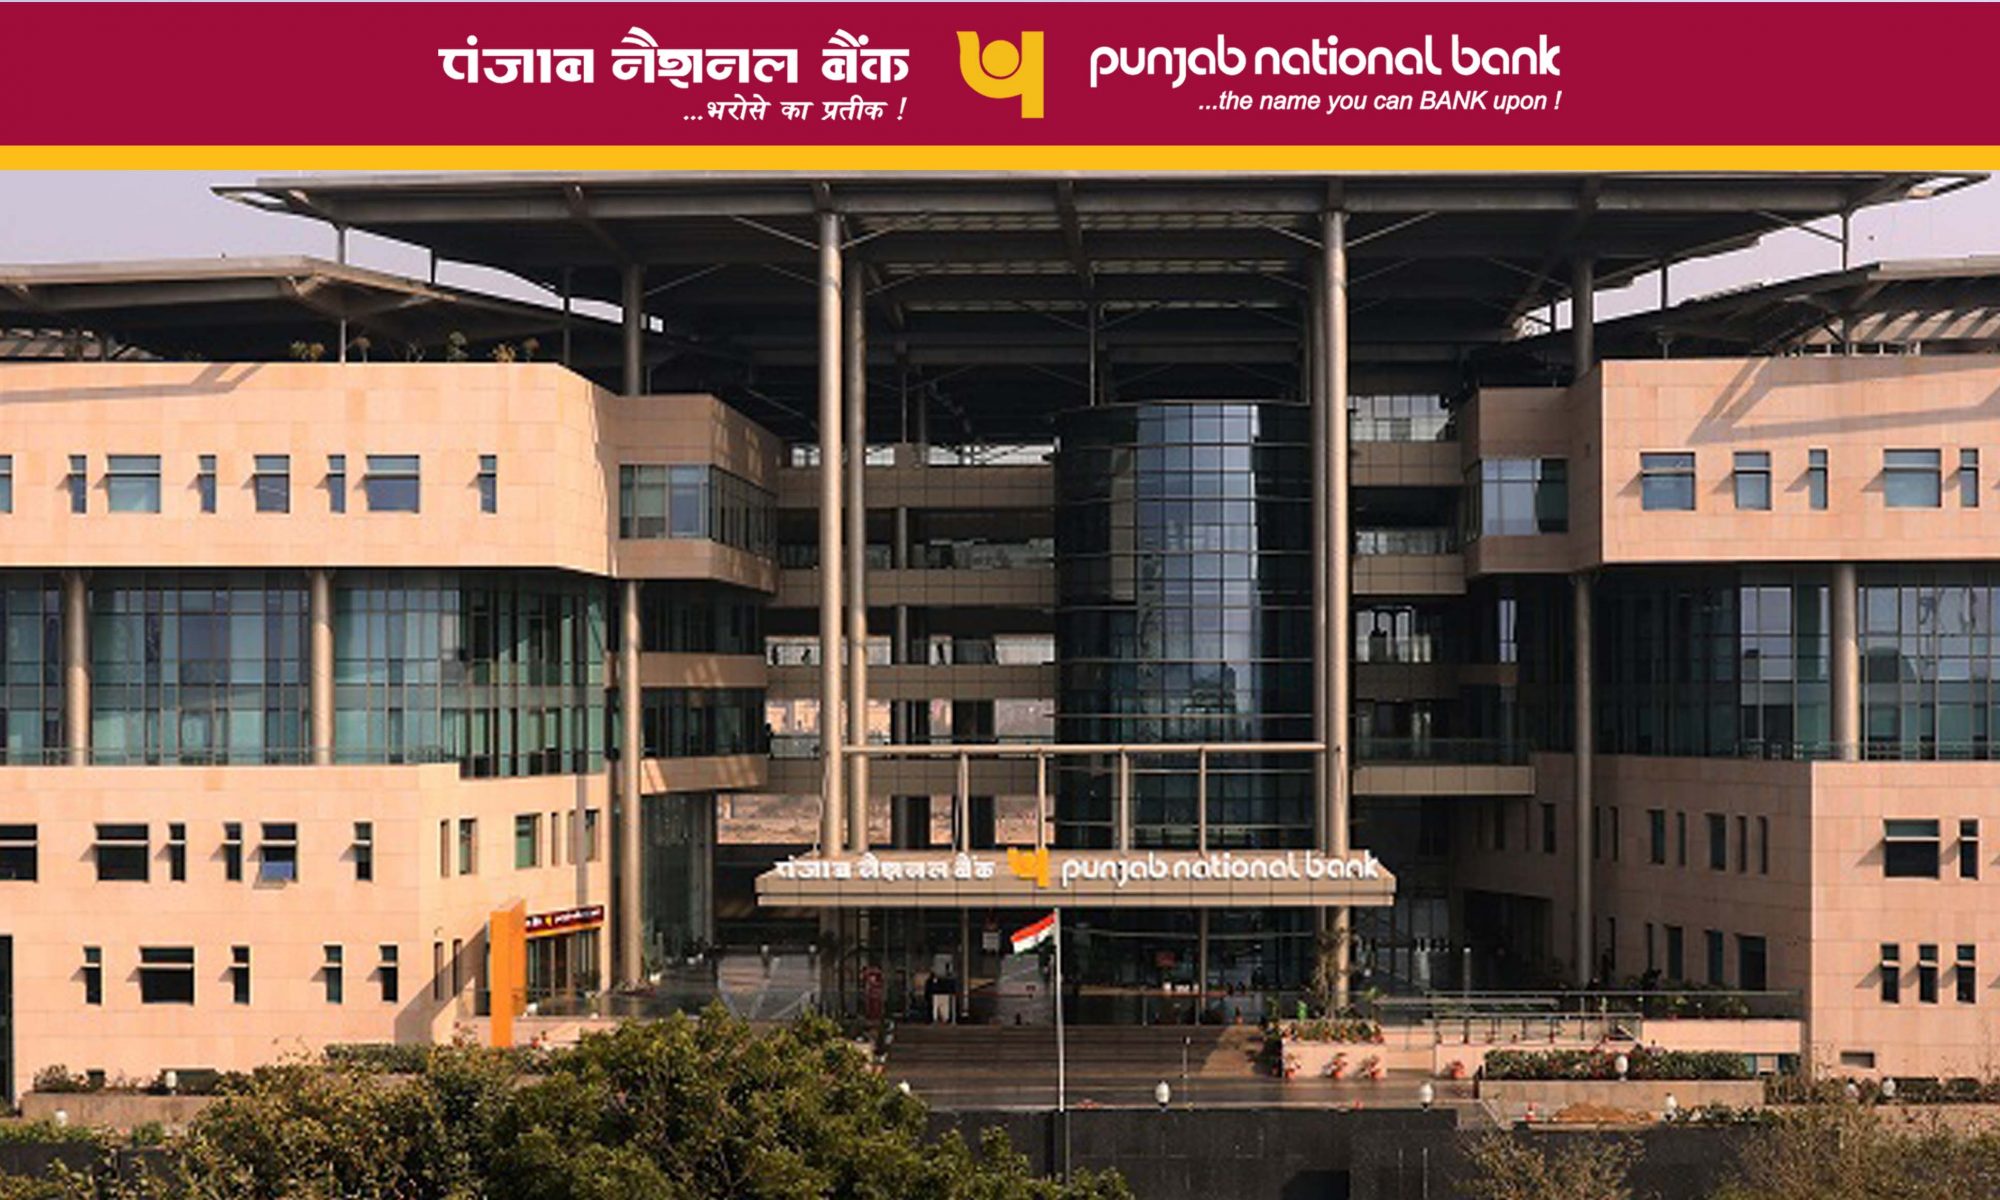 How to Resolve Complaints Against Punjab National Bank